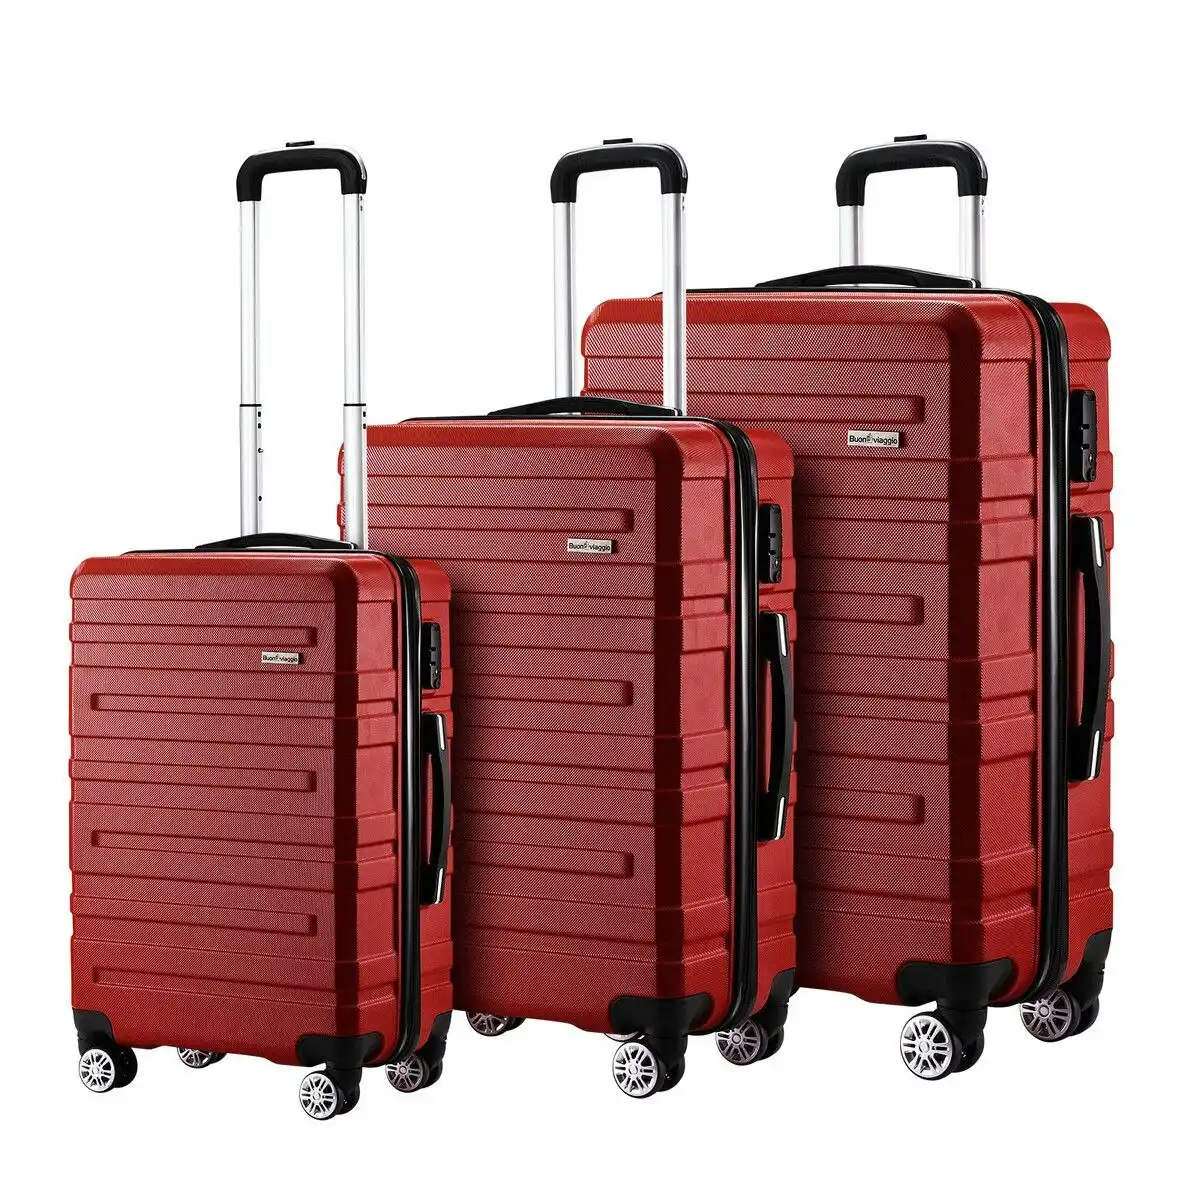 Buon Viaggio 3 Piece Luggage Set Travel Suitcases Hard Carry On Trolley Lightweight with TSA Lock and 2 Covers Red